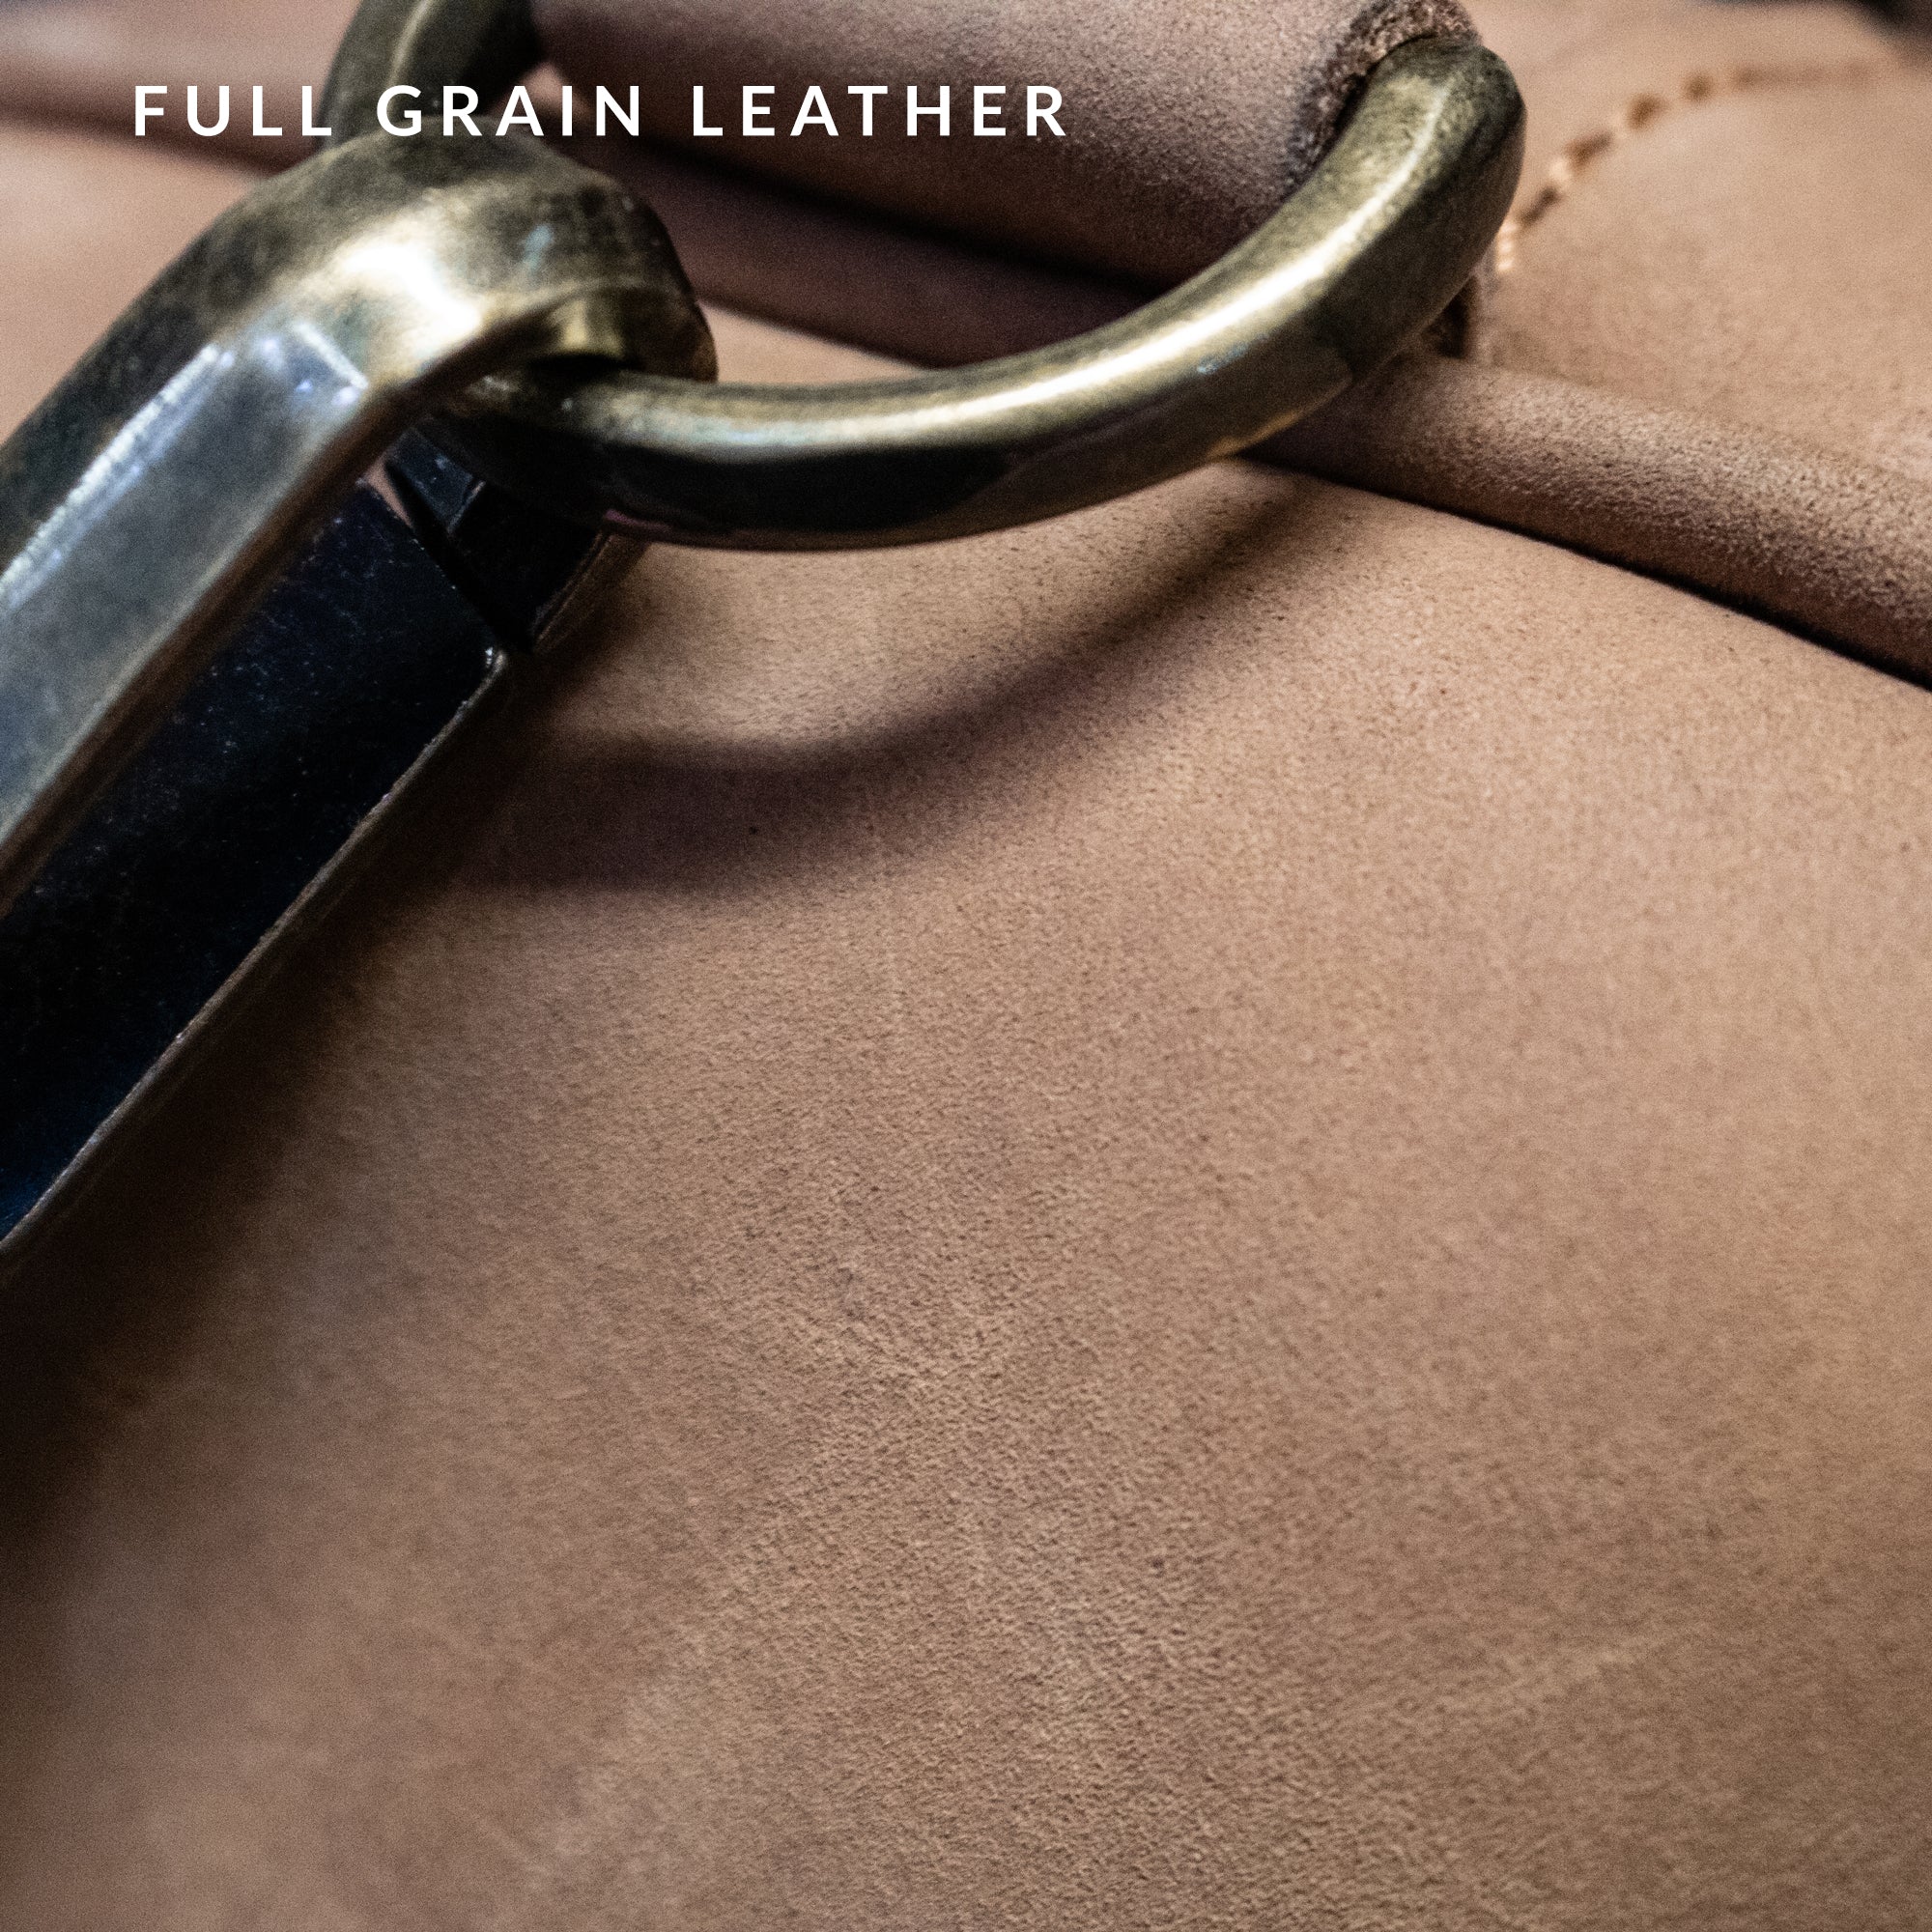 LEATHER SPA - Bag Cleaning & Treatment